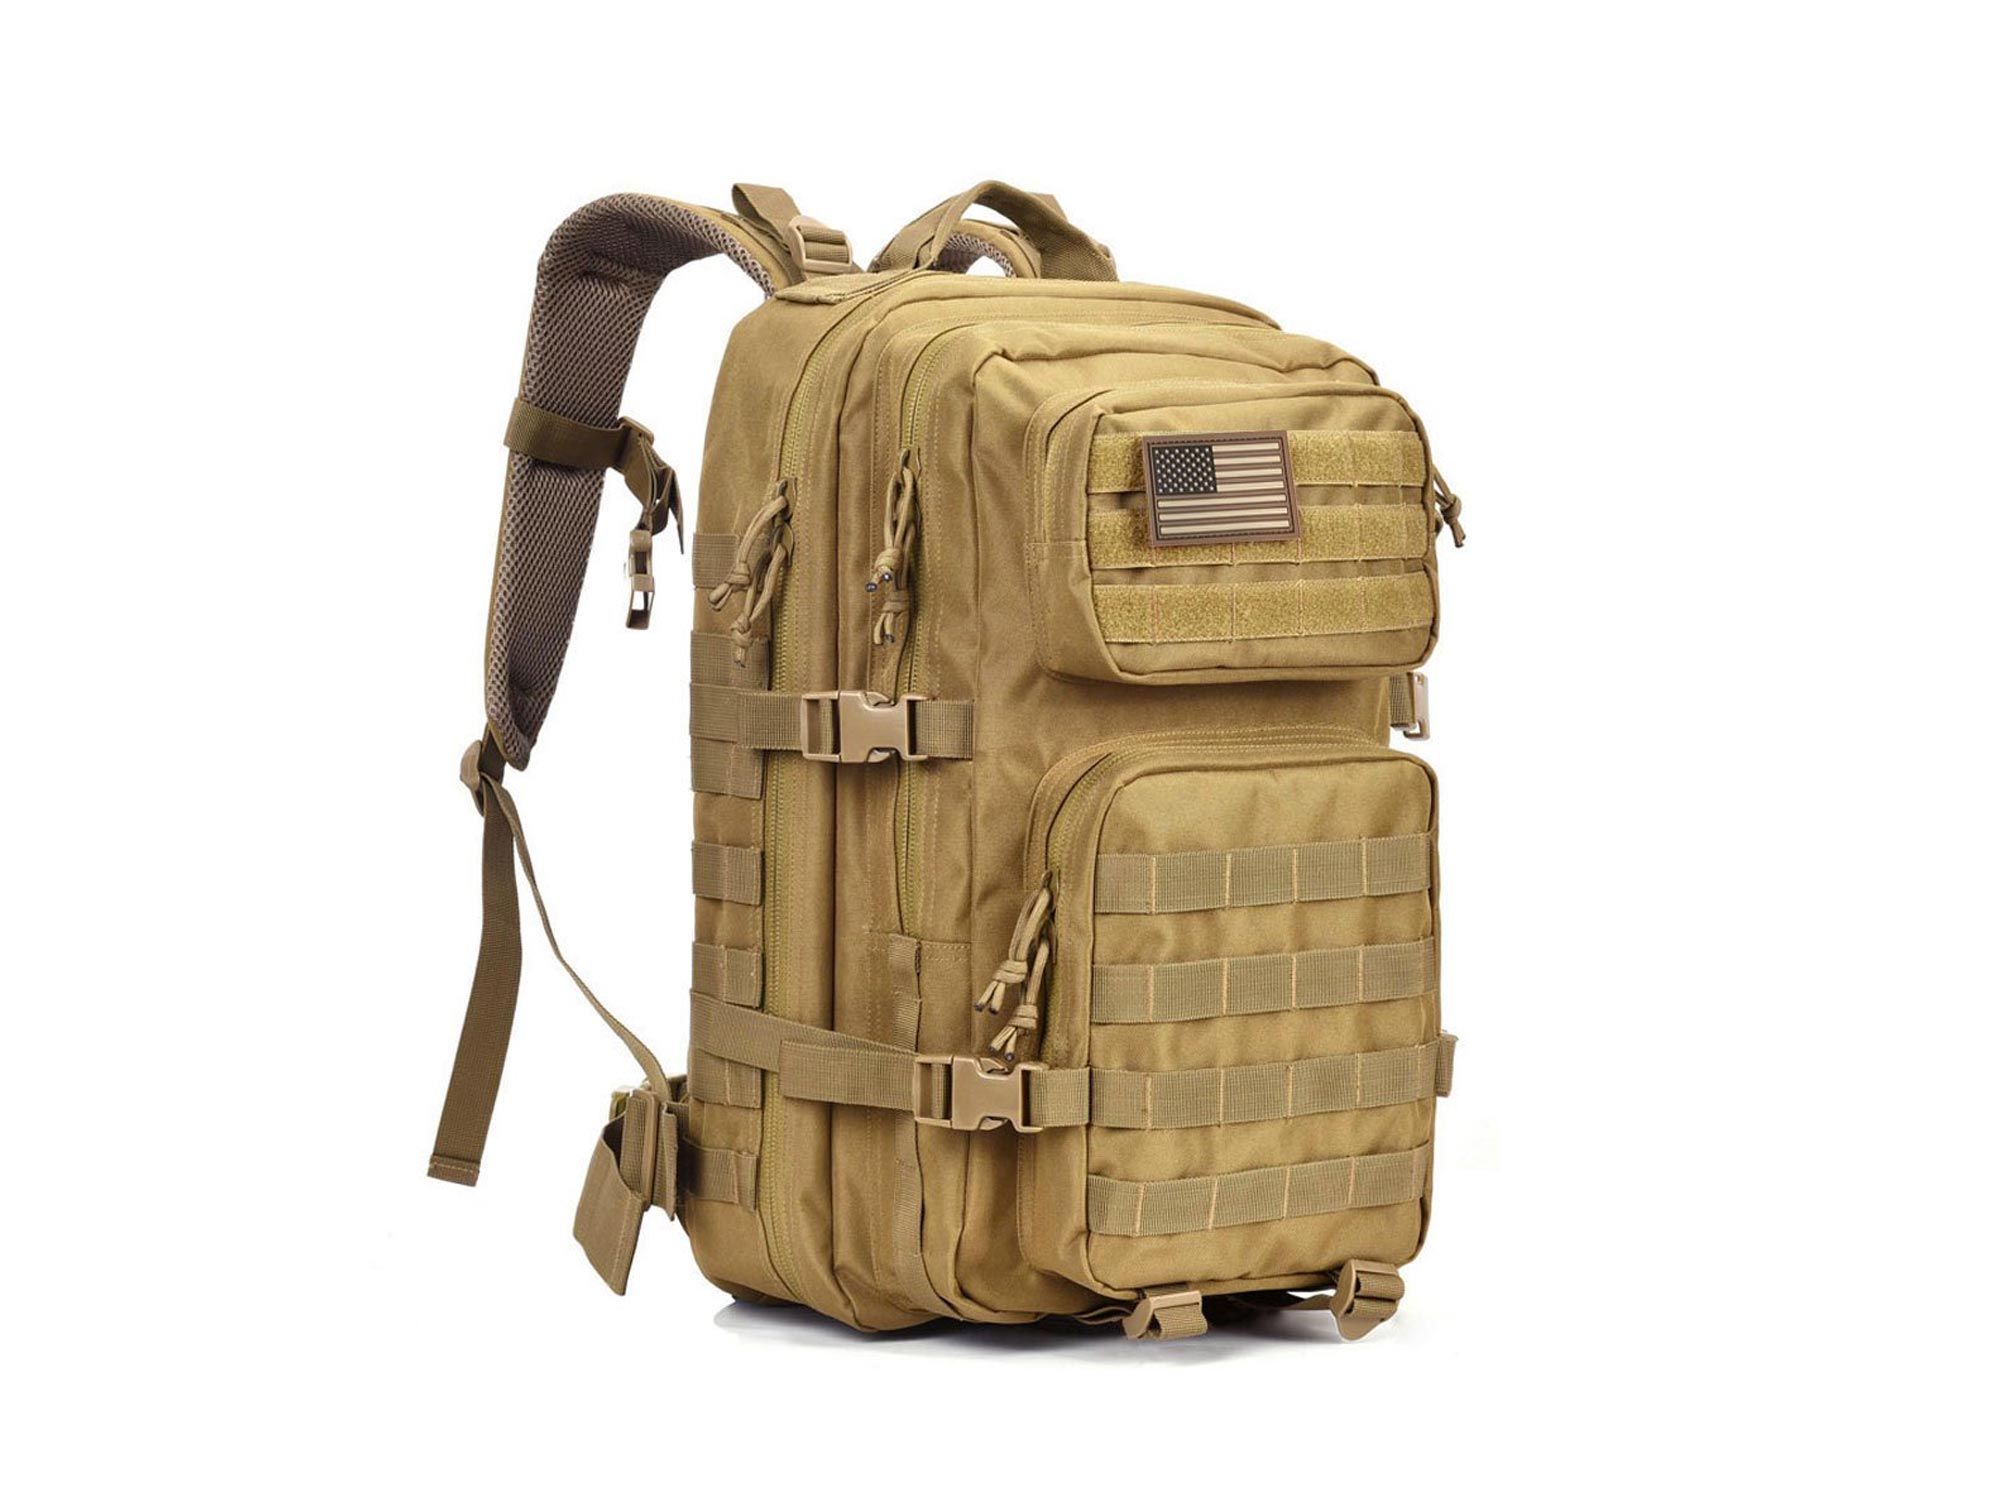 Reebow military backpack